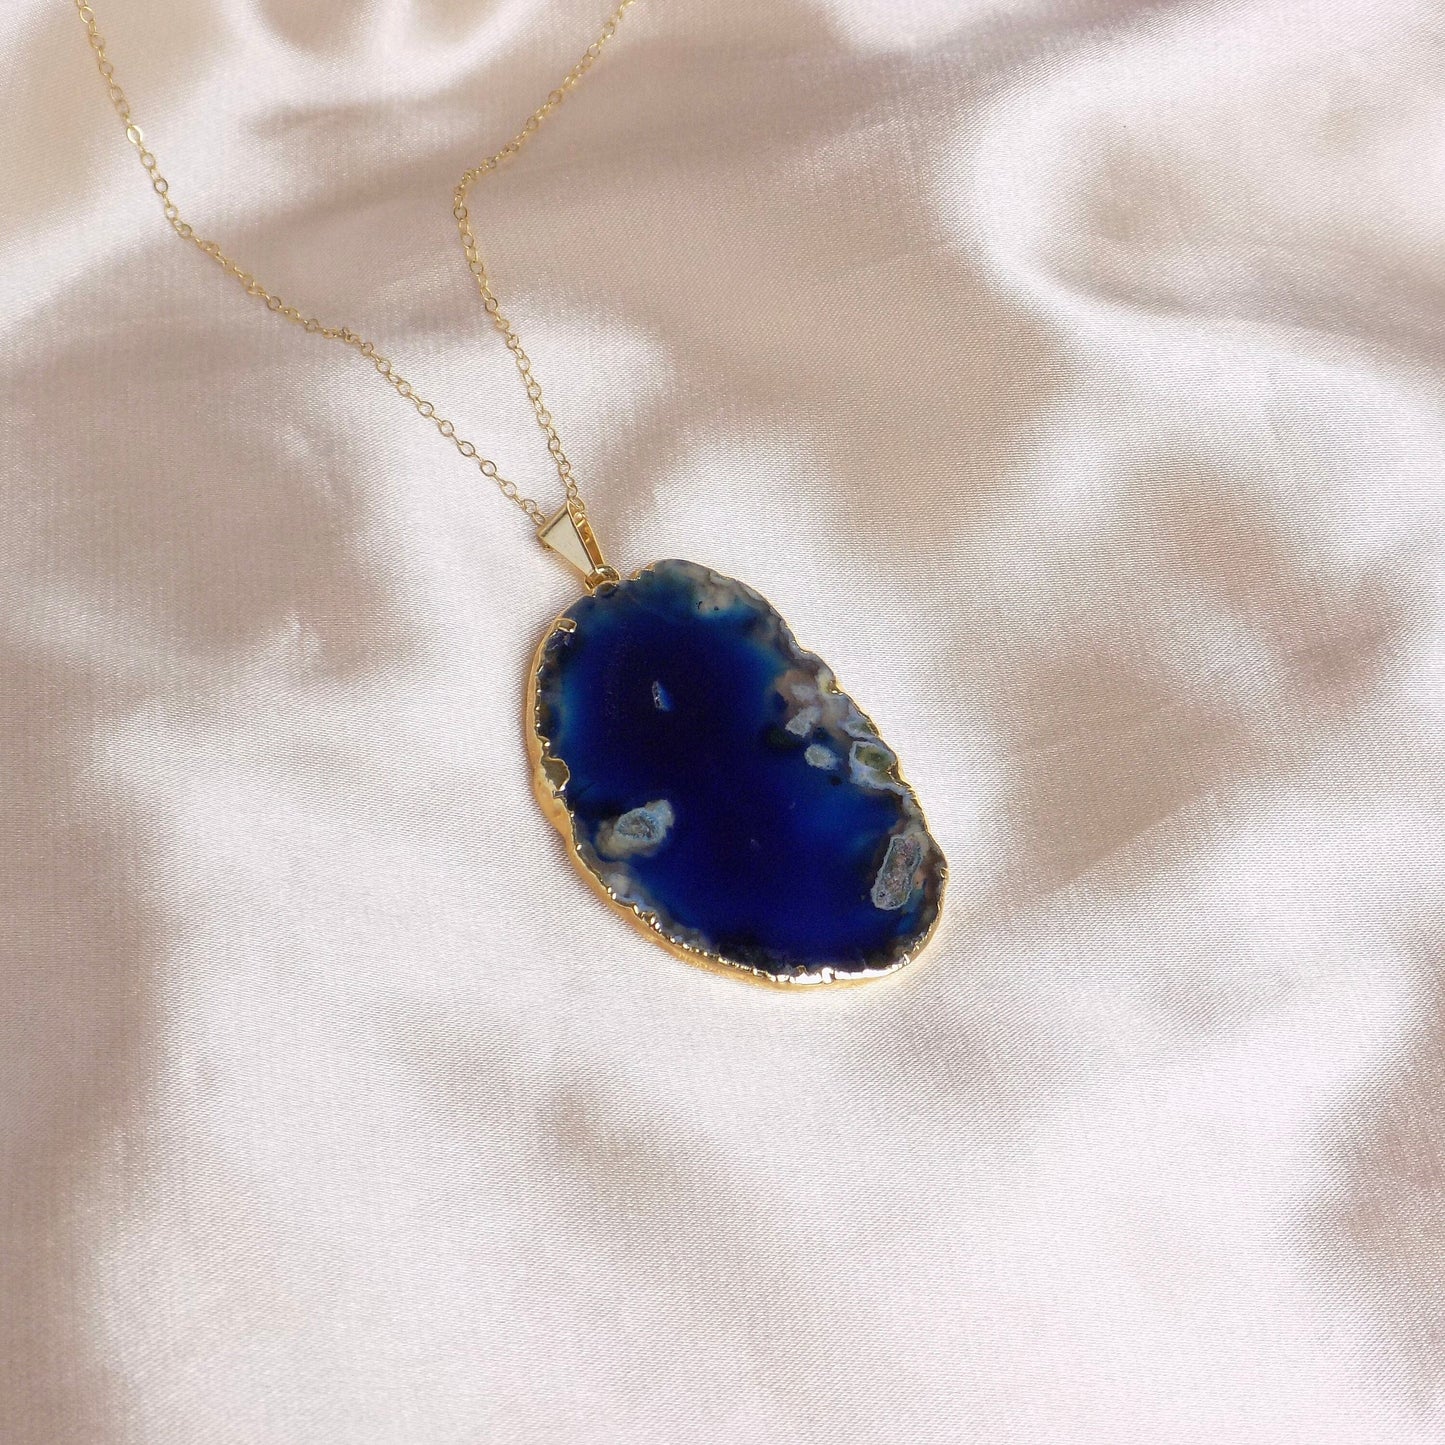 Blue Slice Agate Necklace, Sliced Agate Pendant, Gold Necklace, Boho Necklace, Geode Necklace, Layering Necklace, Gift, Raw Stone, G15-121